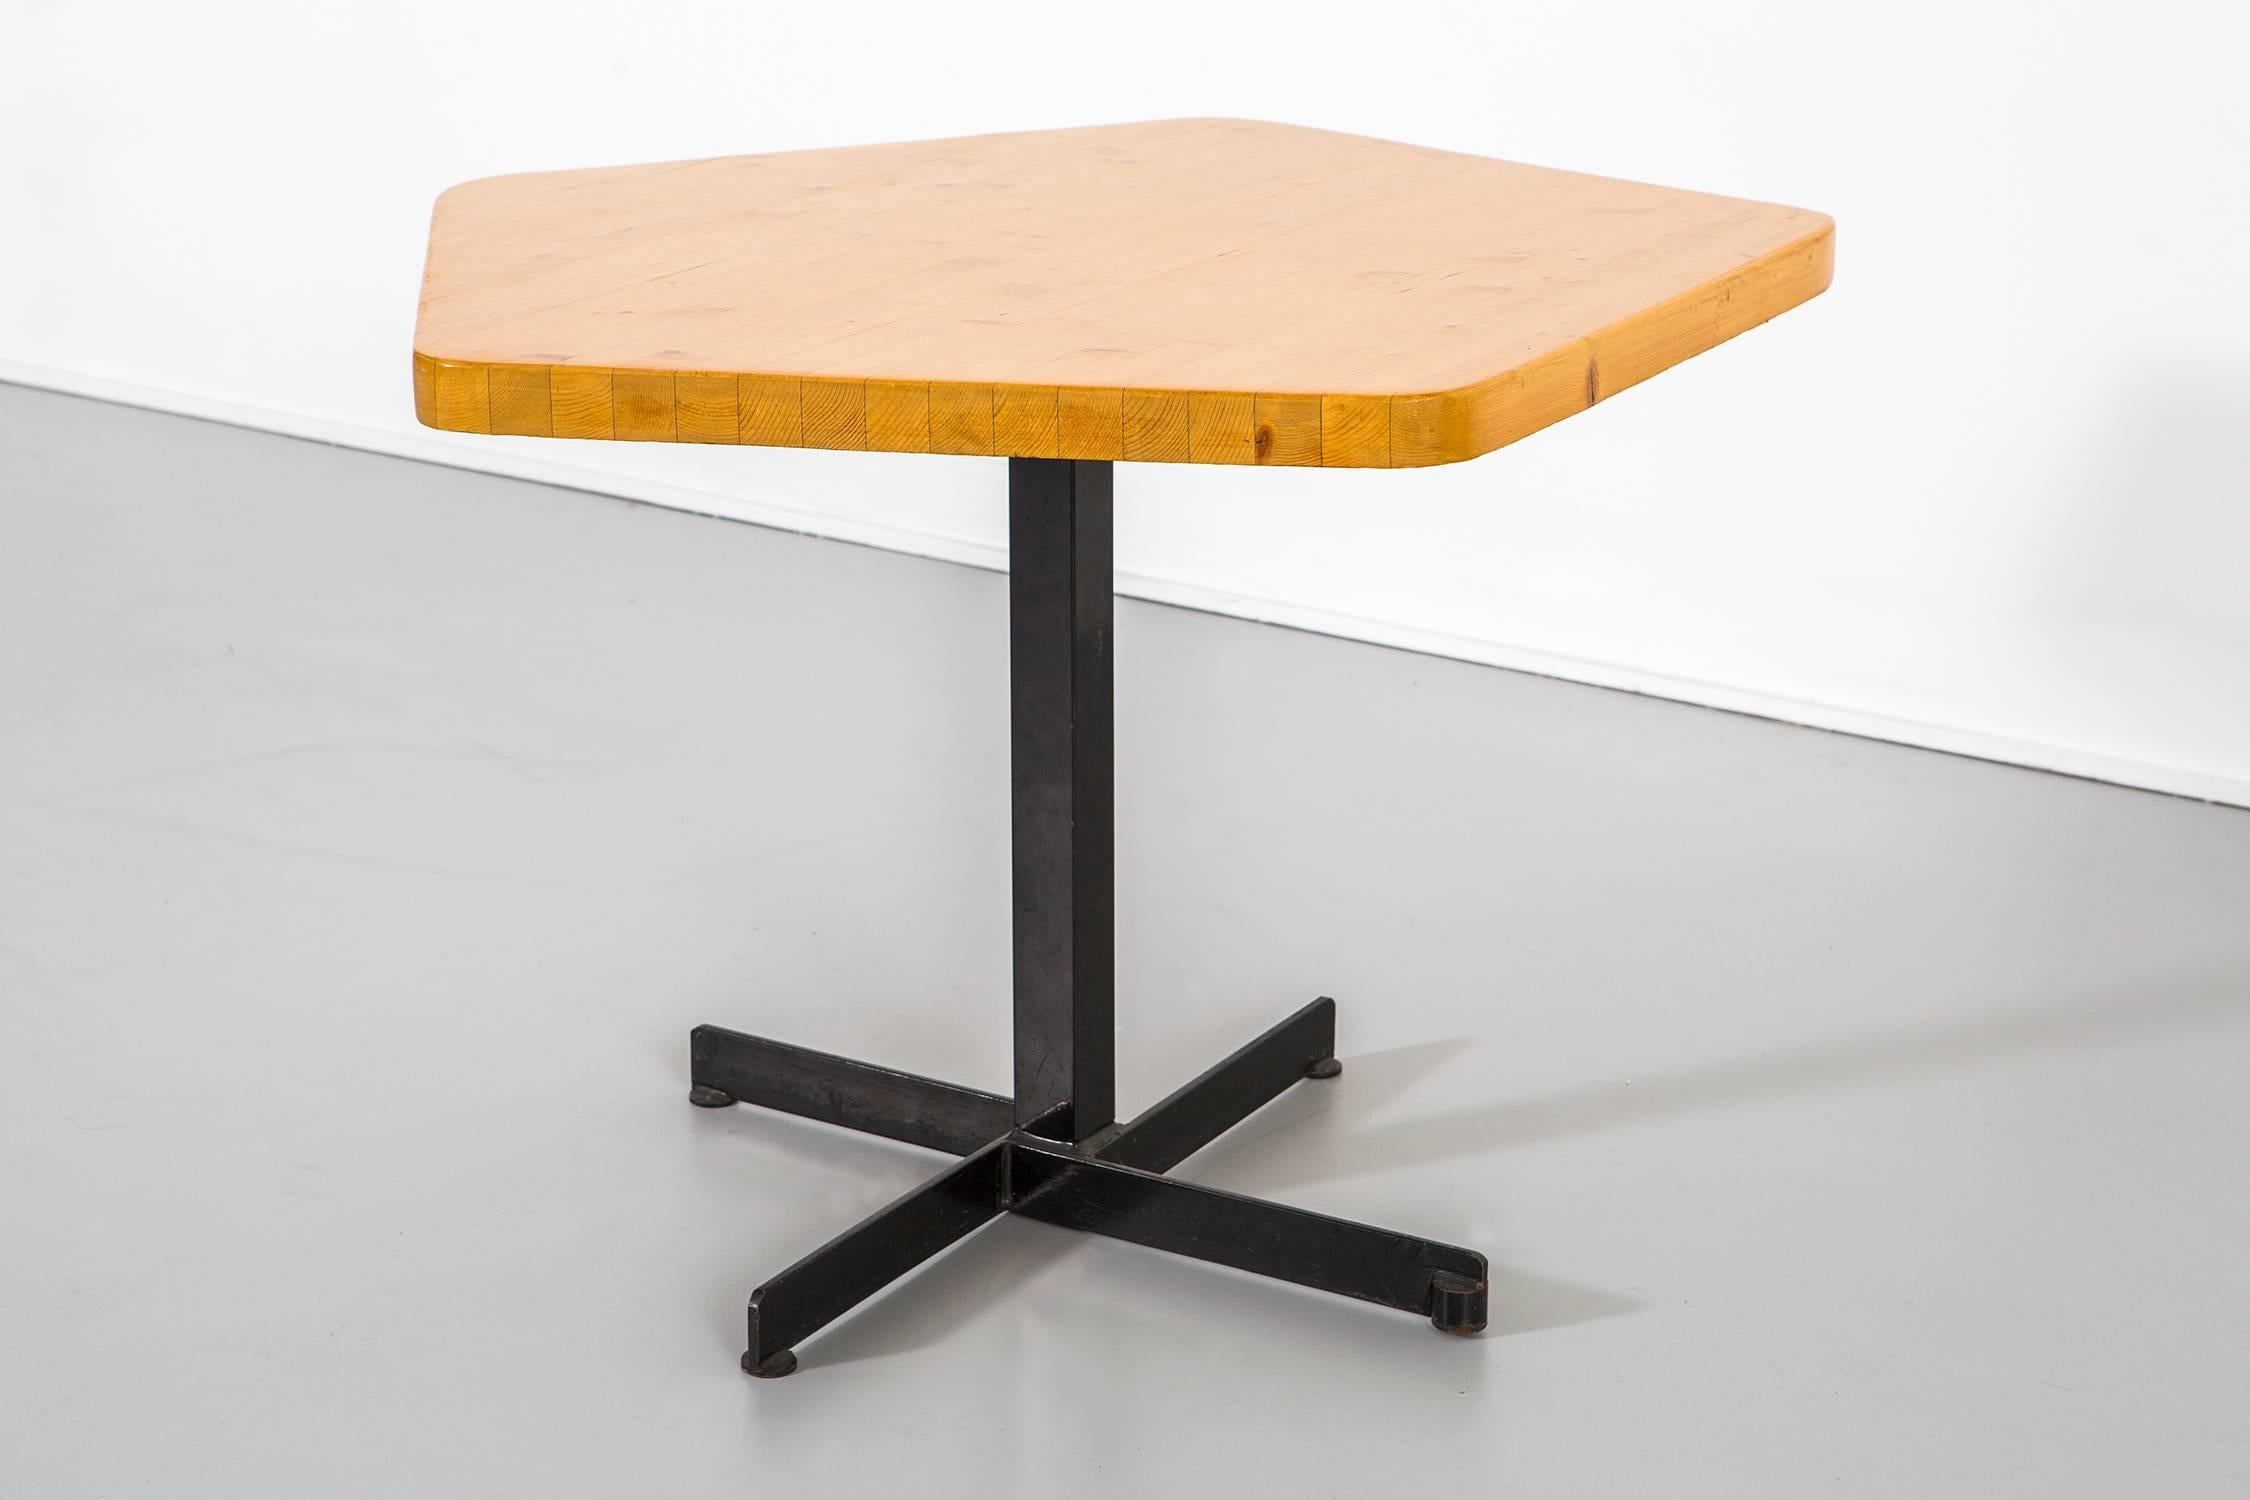 Pentagonal table

designed by Charlotte Perriand for Les Arcs, Savoie

France, circa 1968

Enameled steel and pine

Measures: 26 ?” H x 35 ¼” W x 36” D.

These forms were utilized in many residences of Les Arcs.